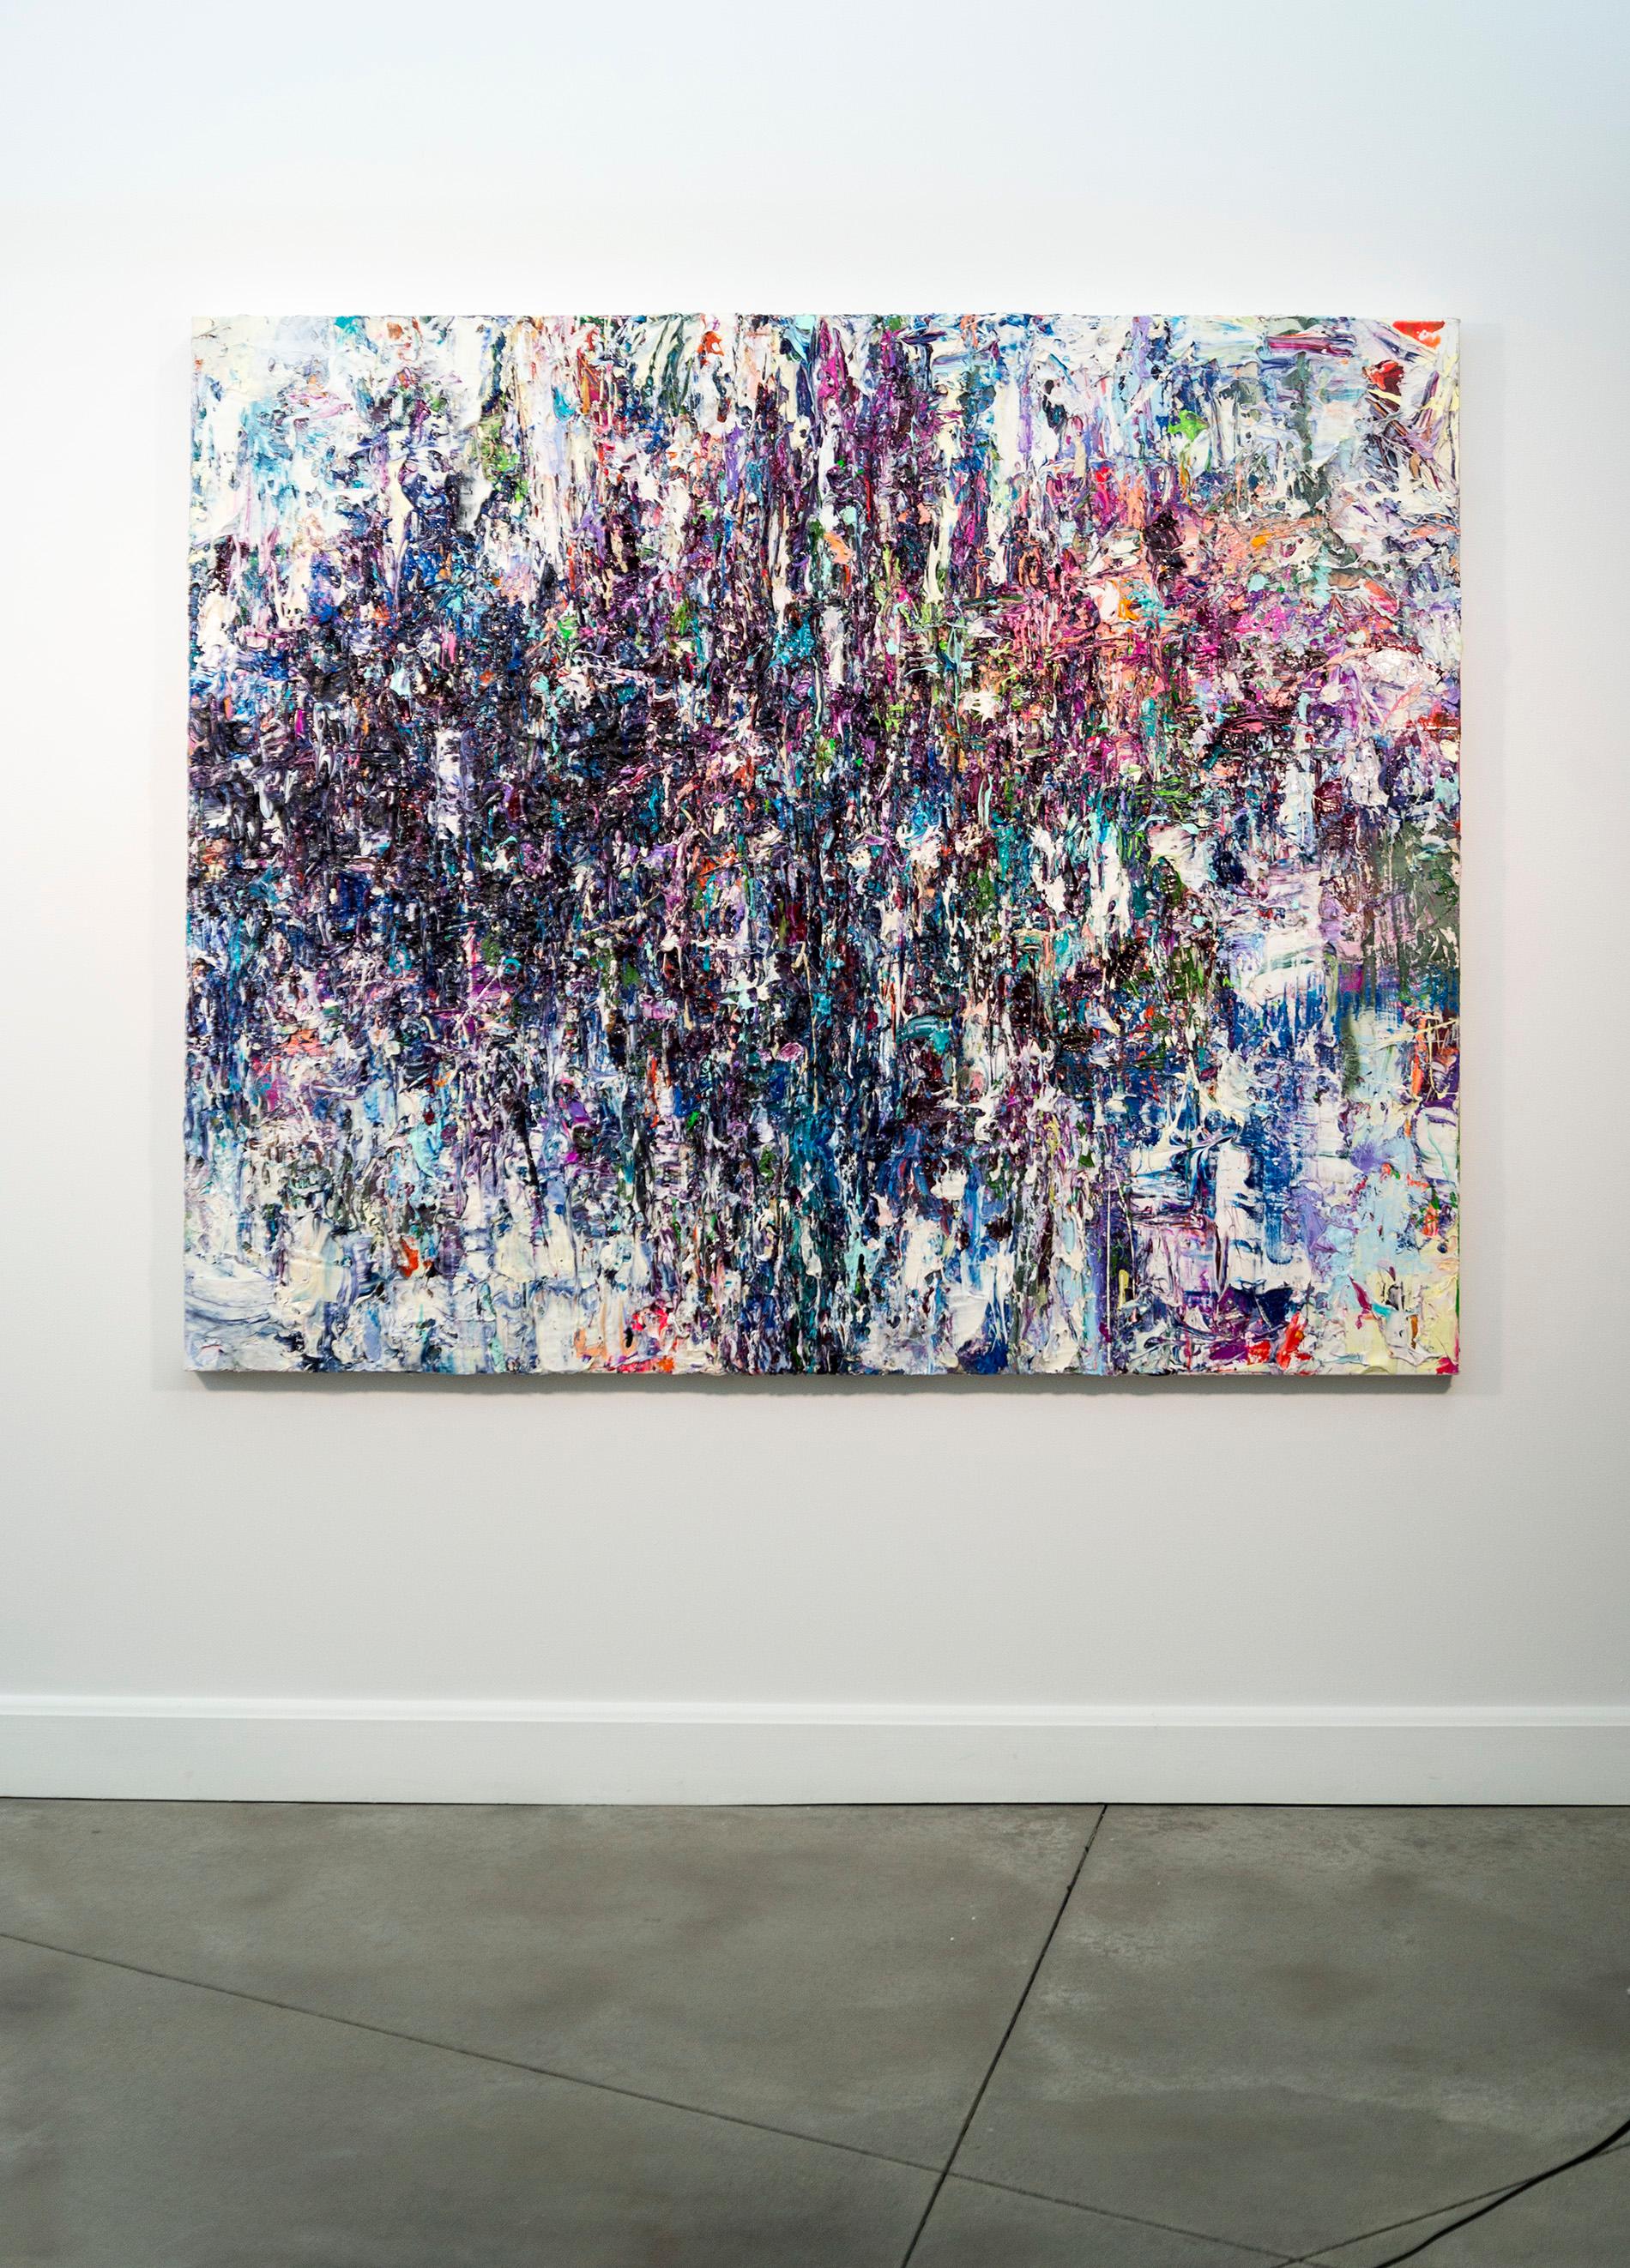  Powder Festival - colorful, impasto, abstract expressionist, acrylic on canvas - Painting by Adam Cohen